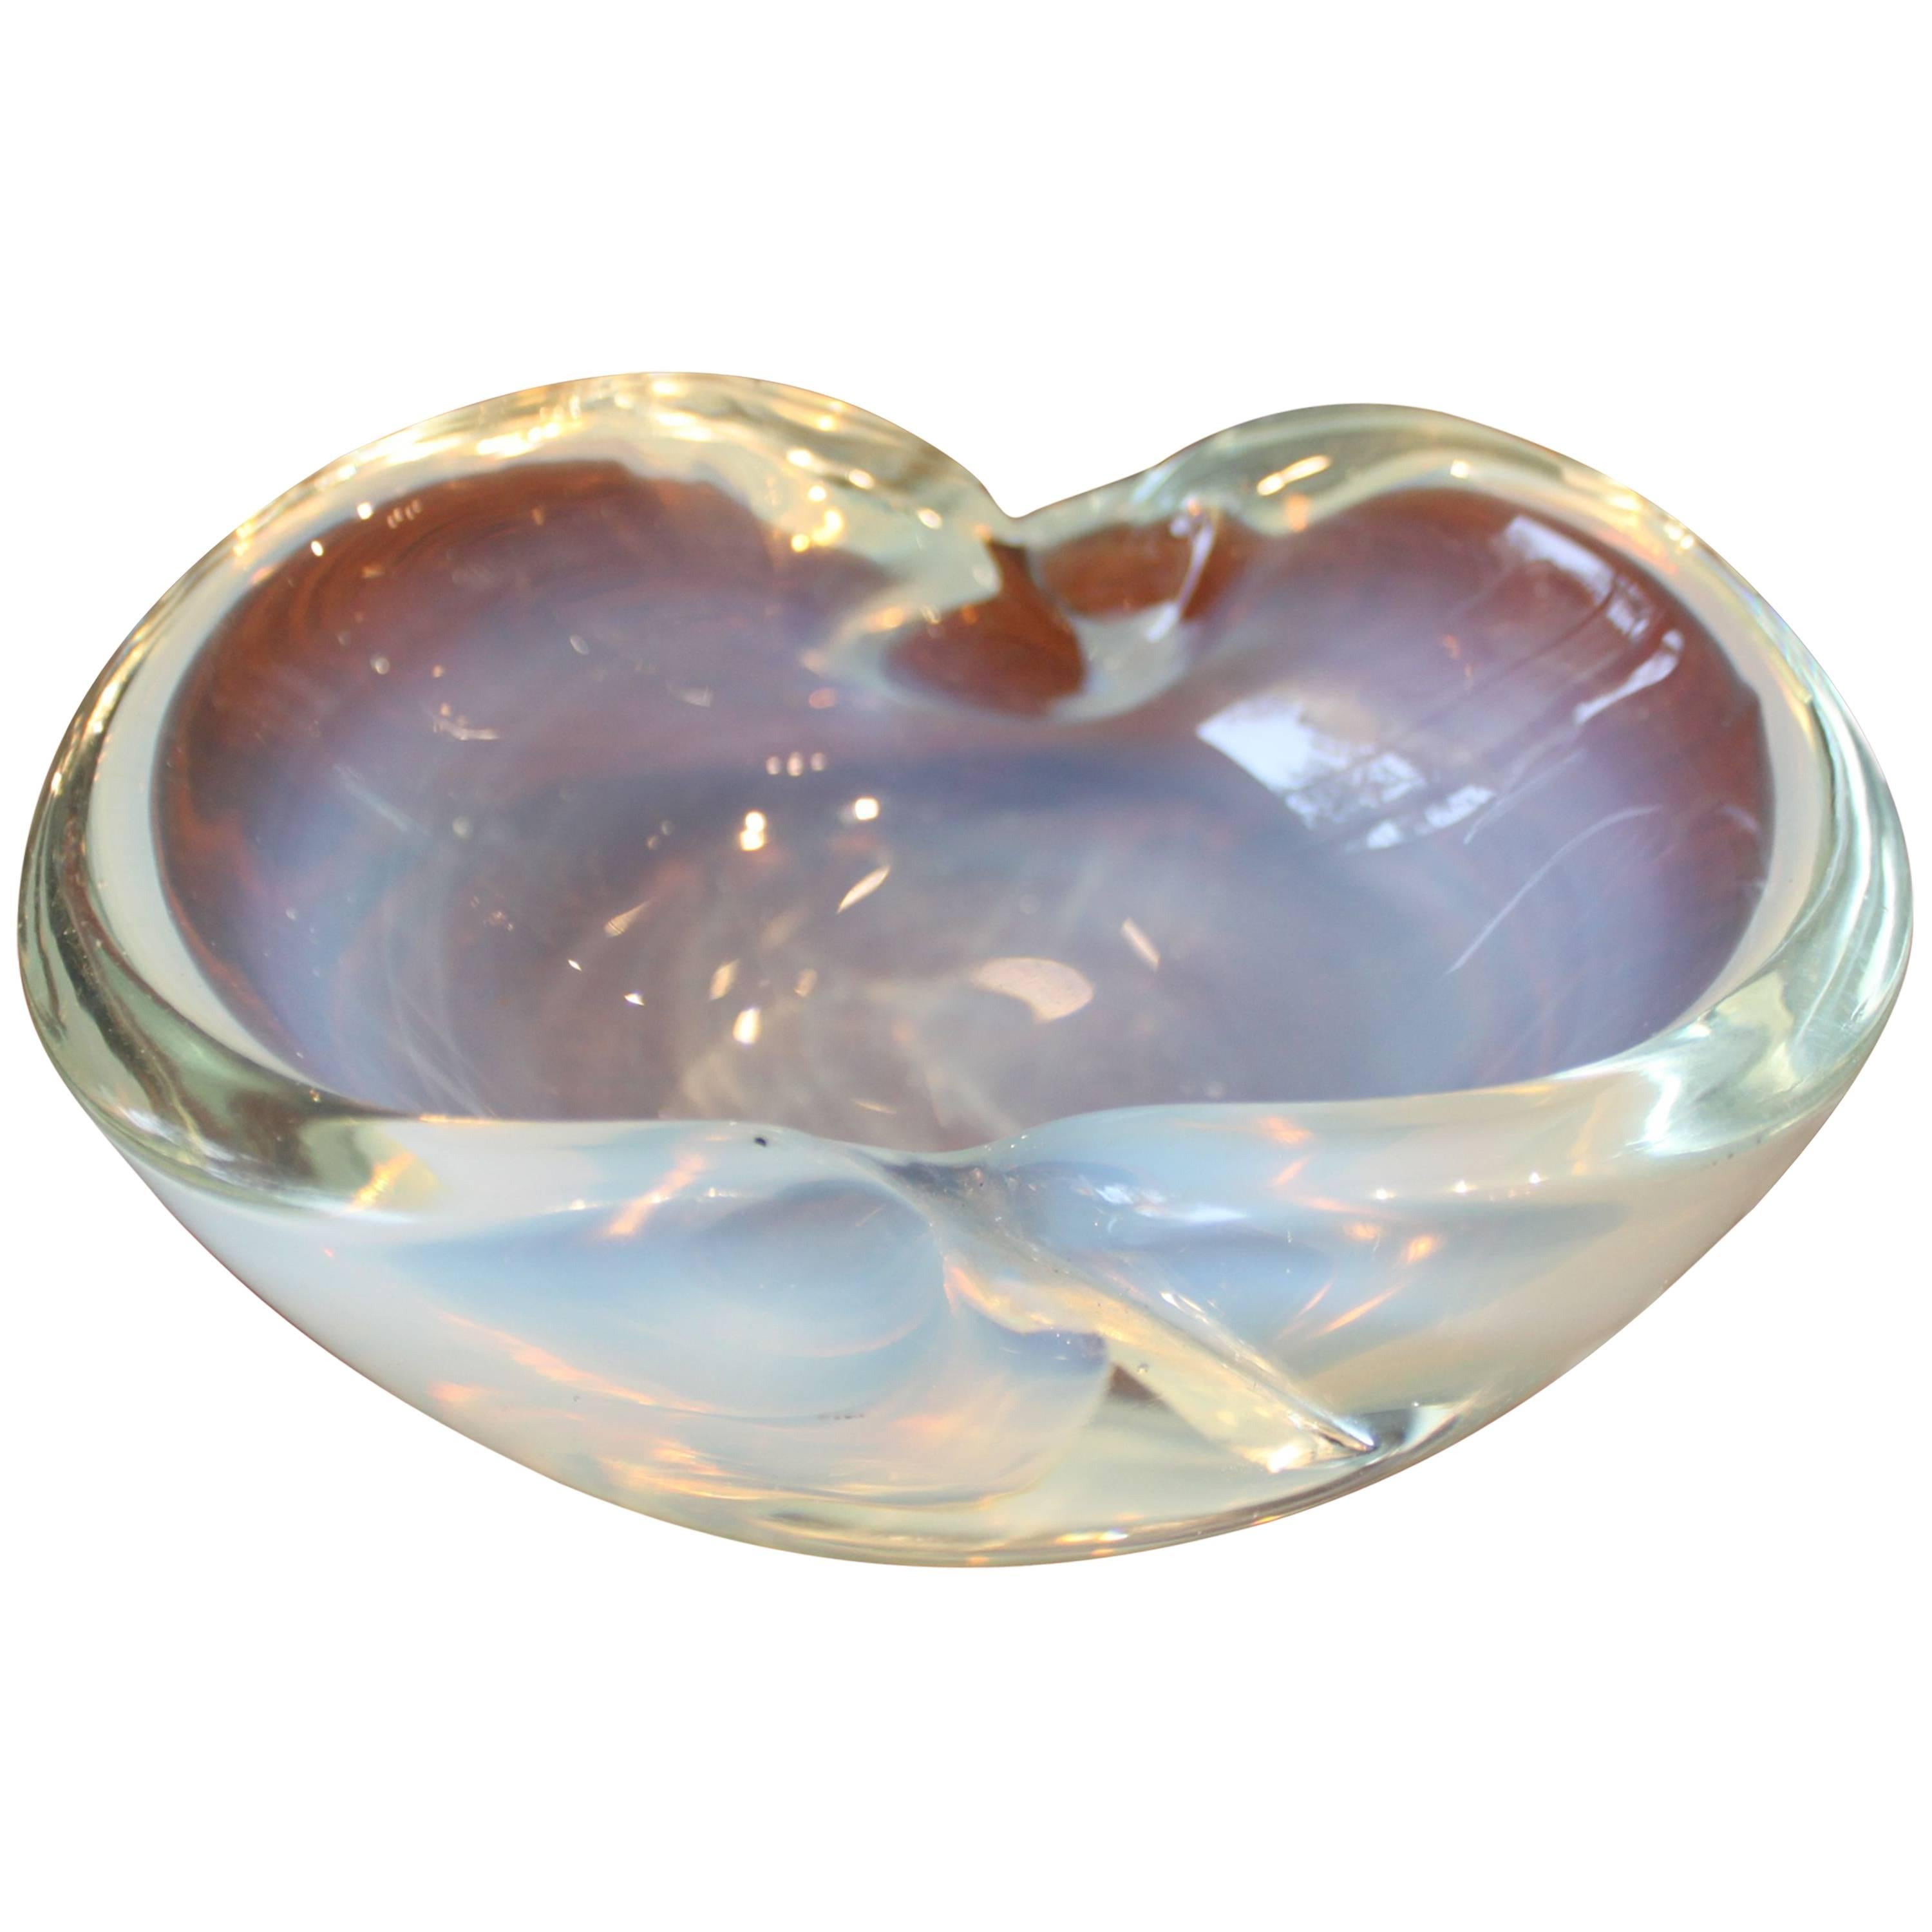 Vintage Murano Glass Iridescent Opal Color Ashtray or Bowl